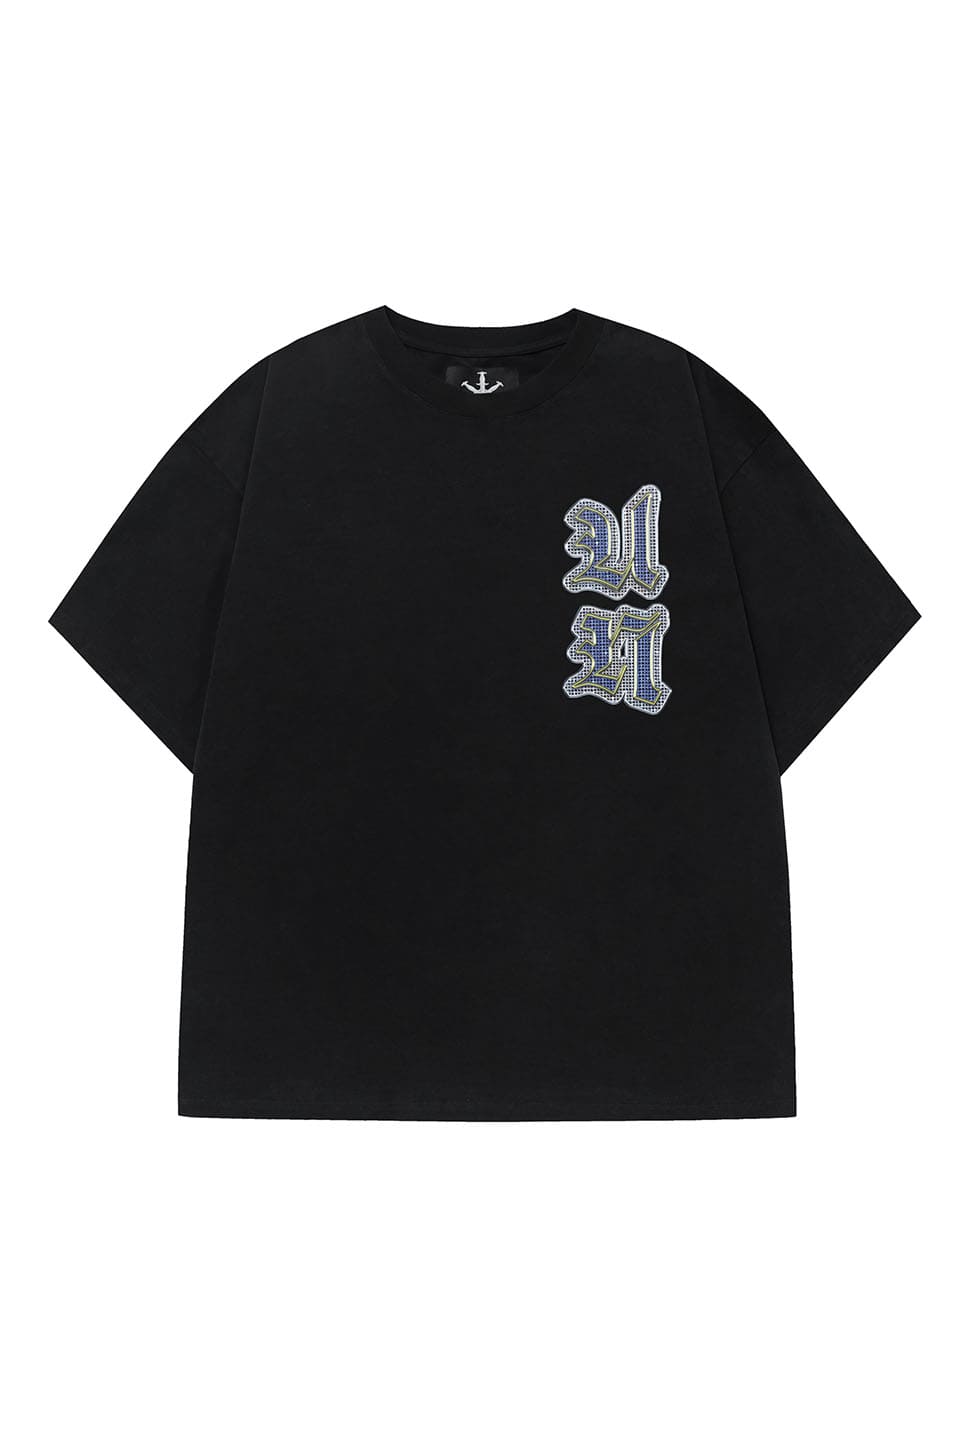 Unknown London Multi Logo Iced Out Tee